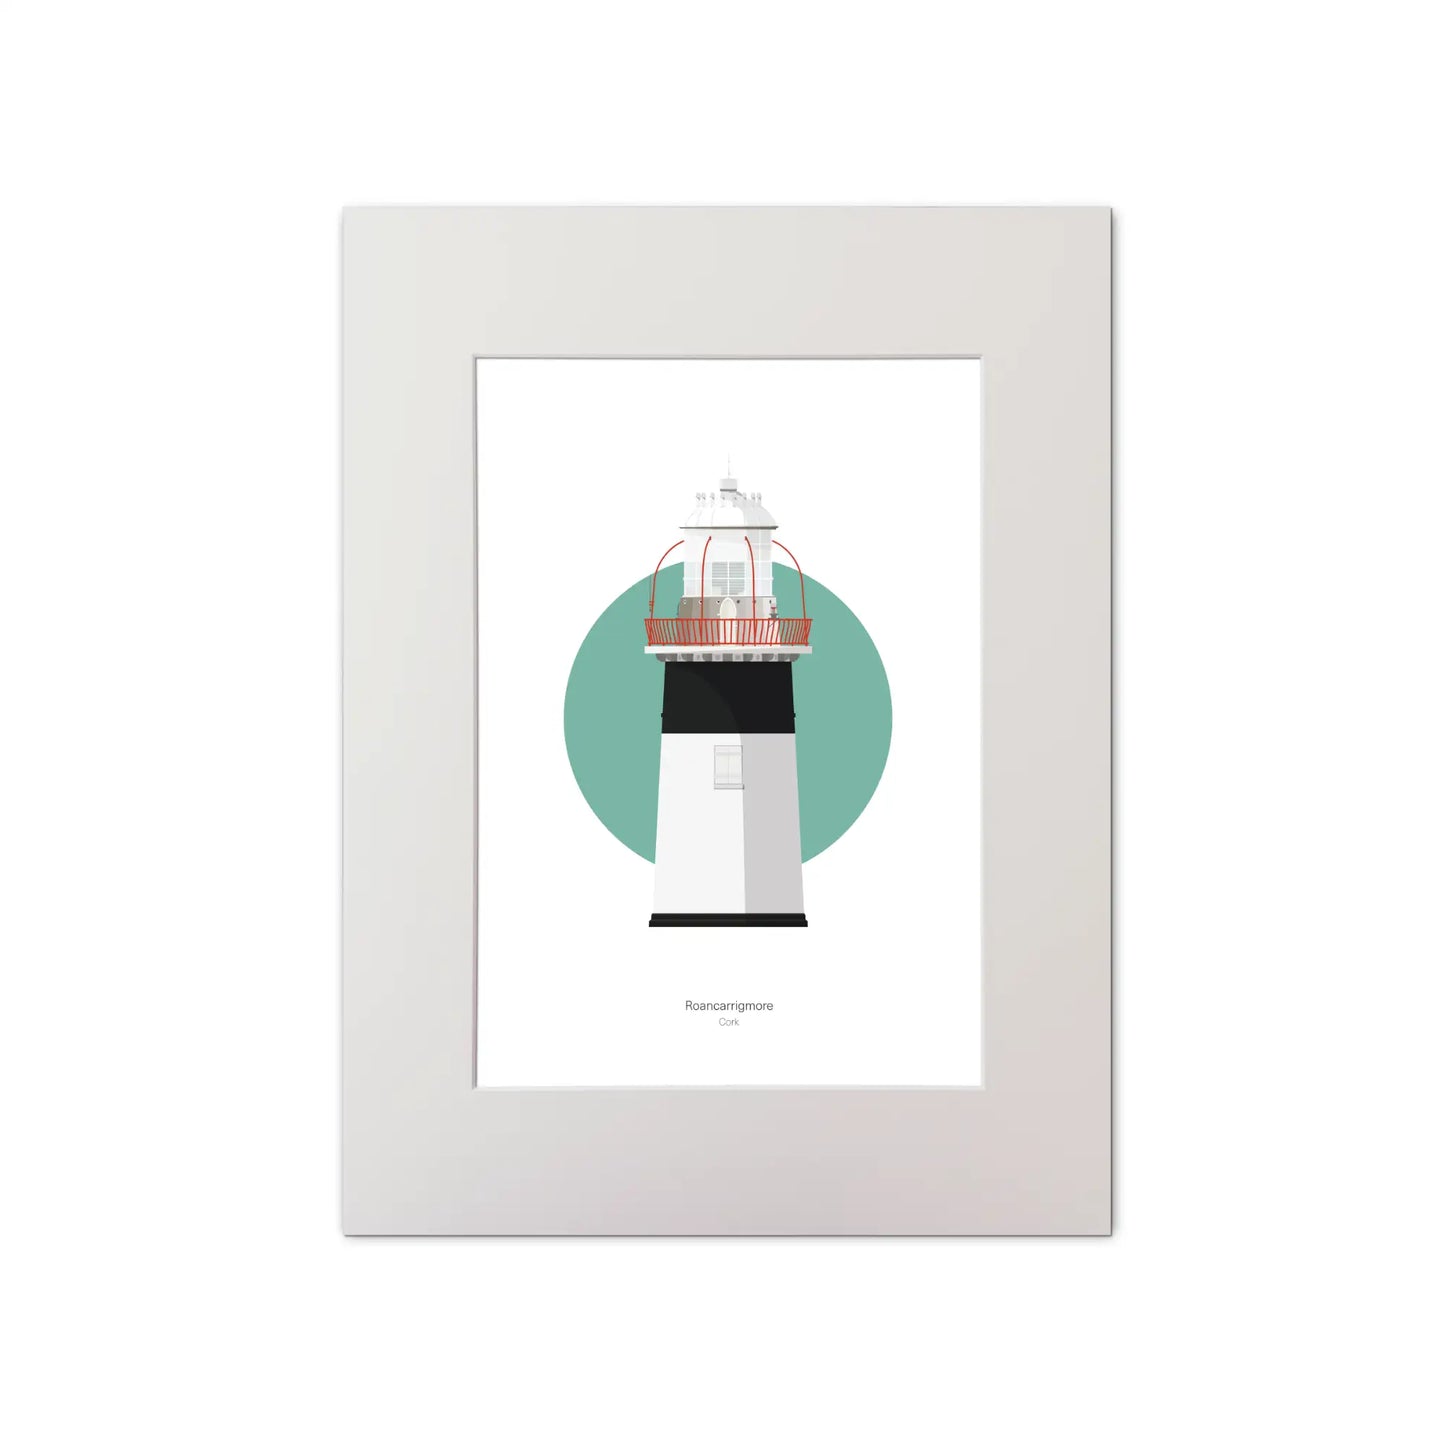 Illustration of Roancarrigmore lighthouse on a white background inside light blue square, mounted and measuring 30x40cm.